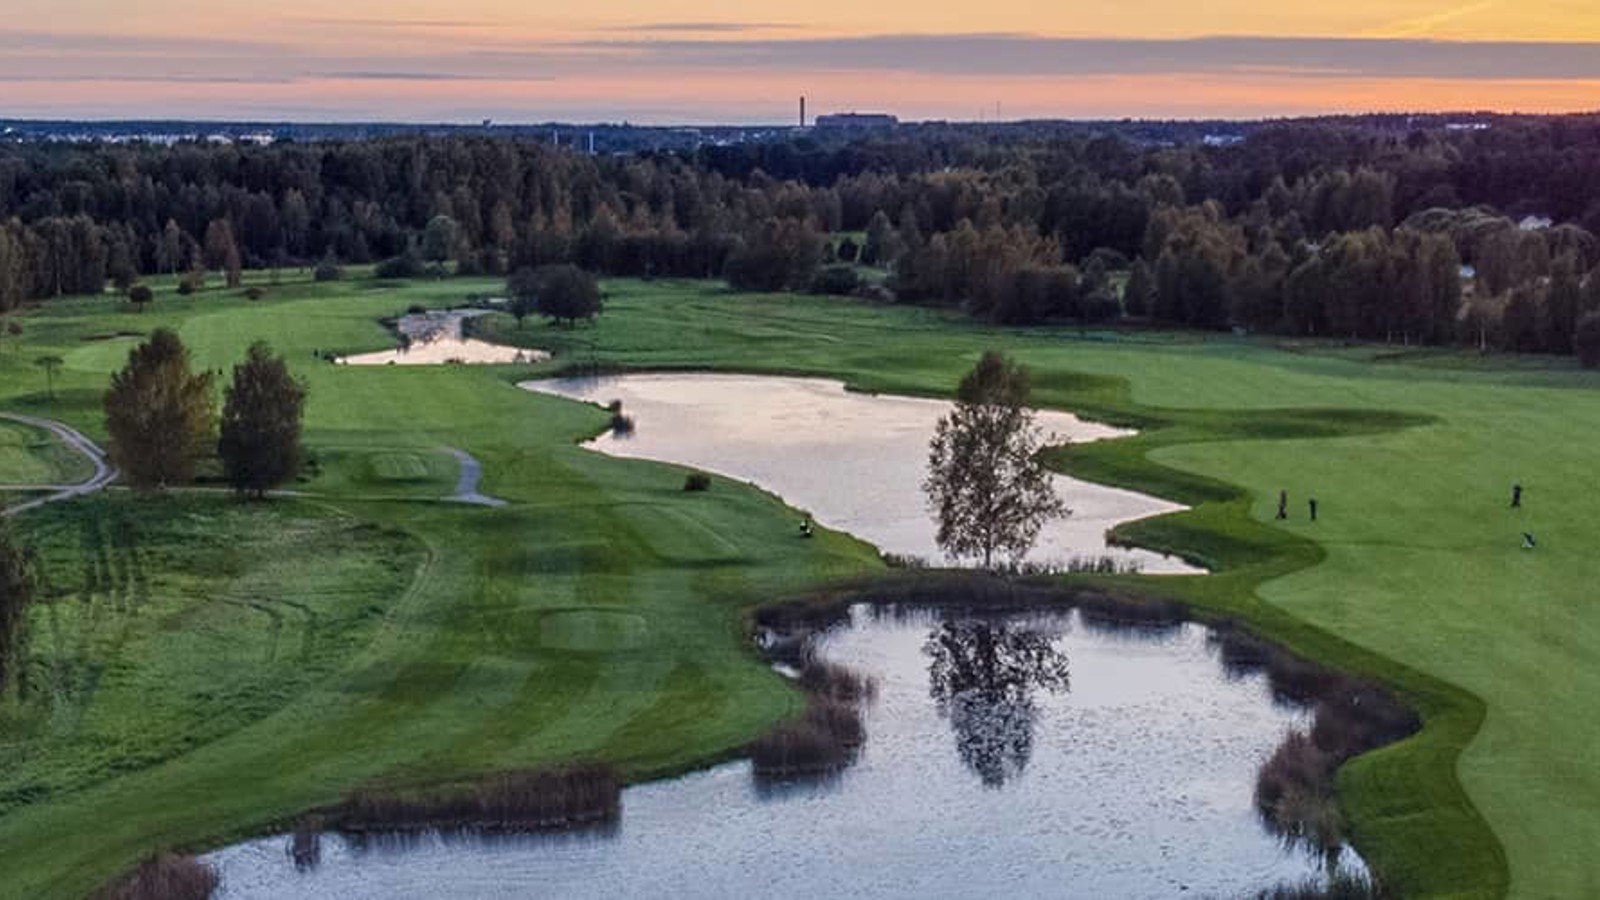 Golf course in evening light